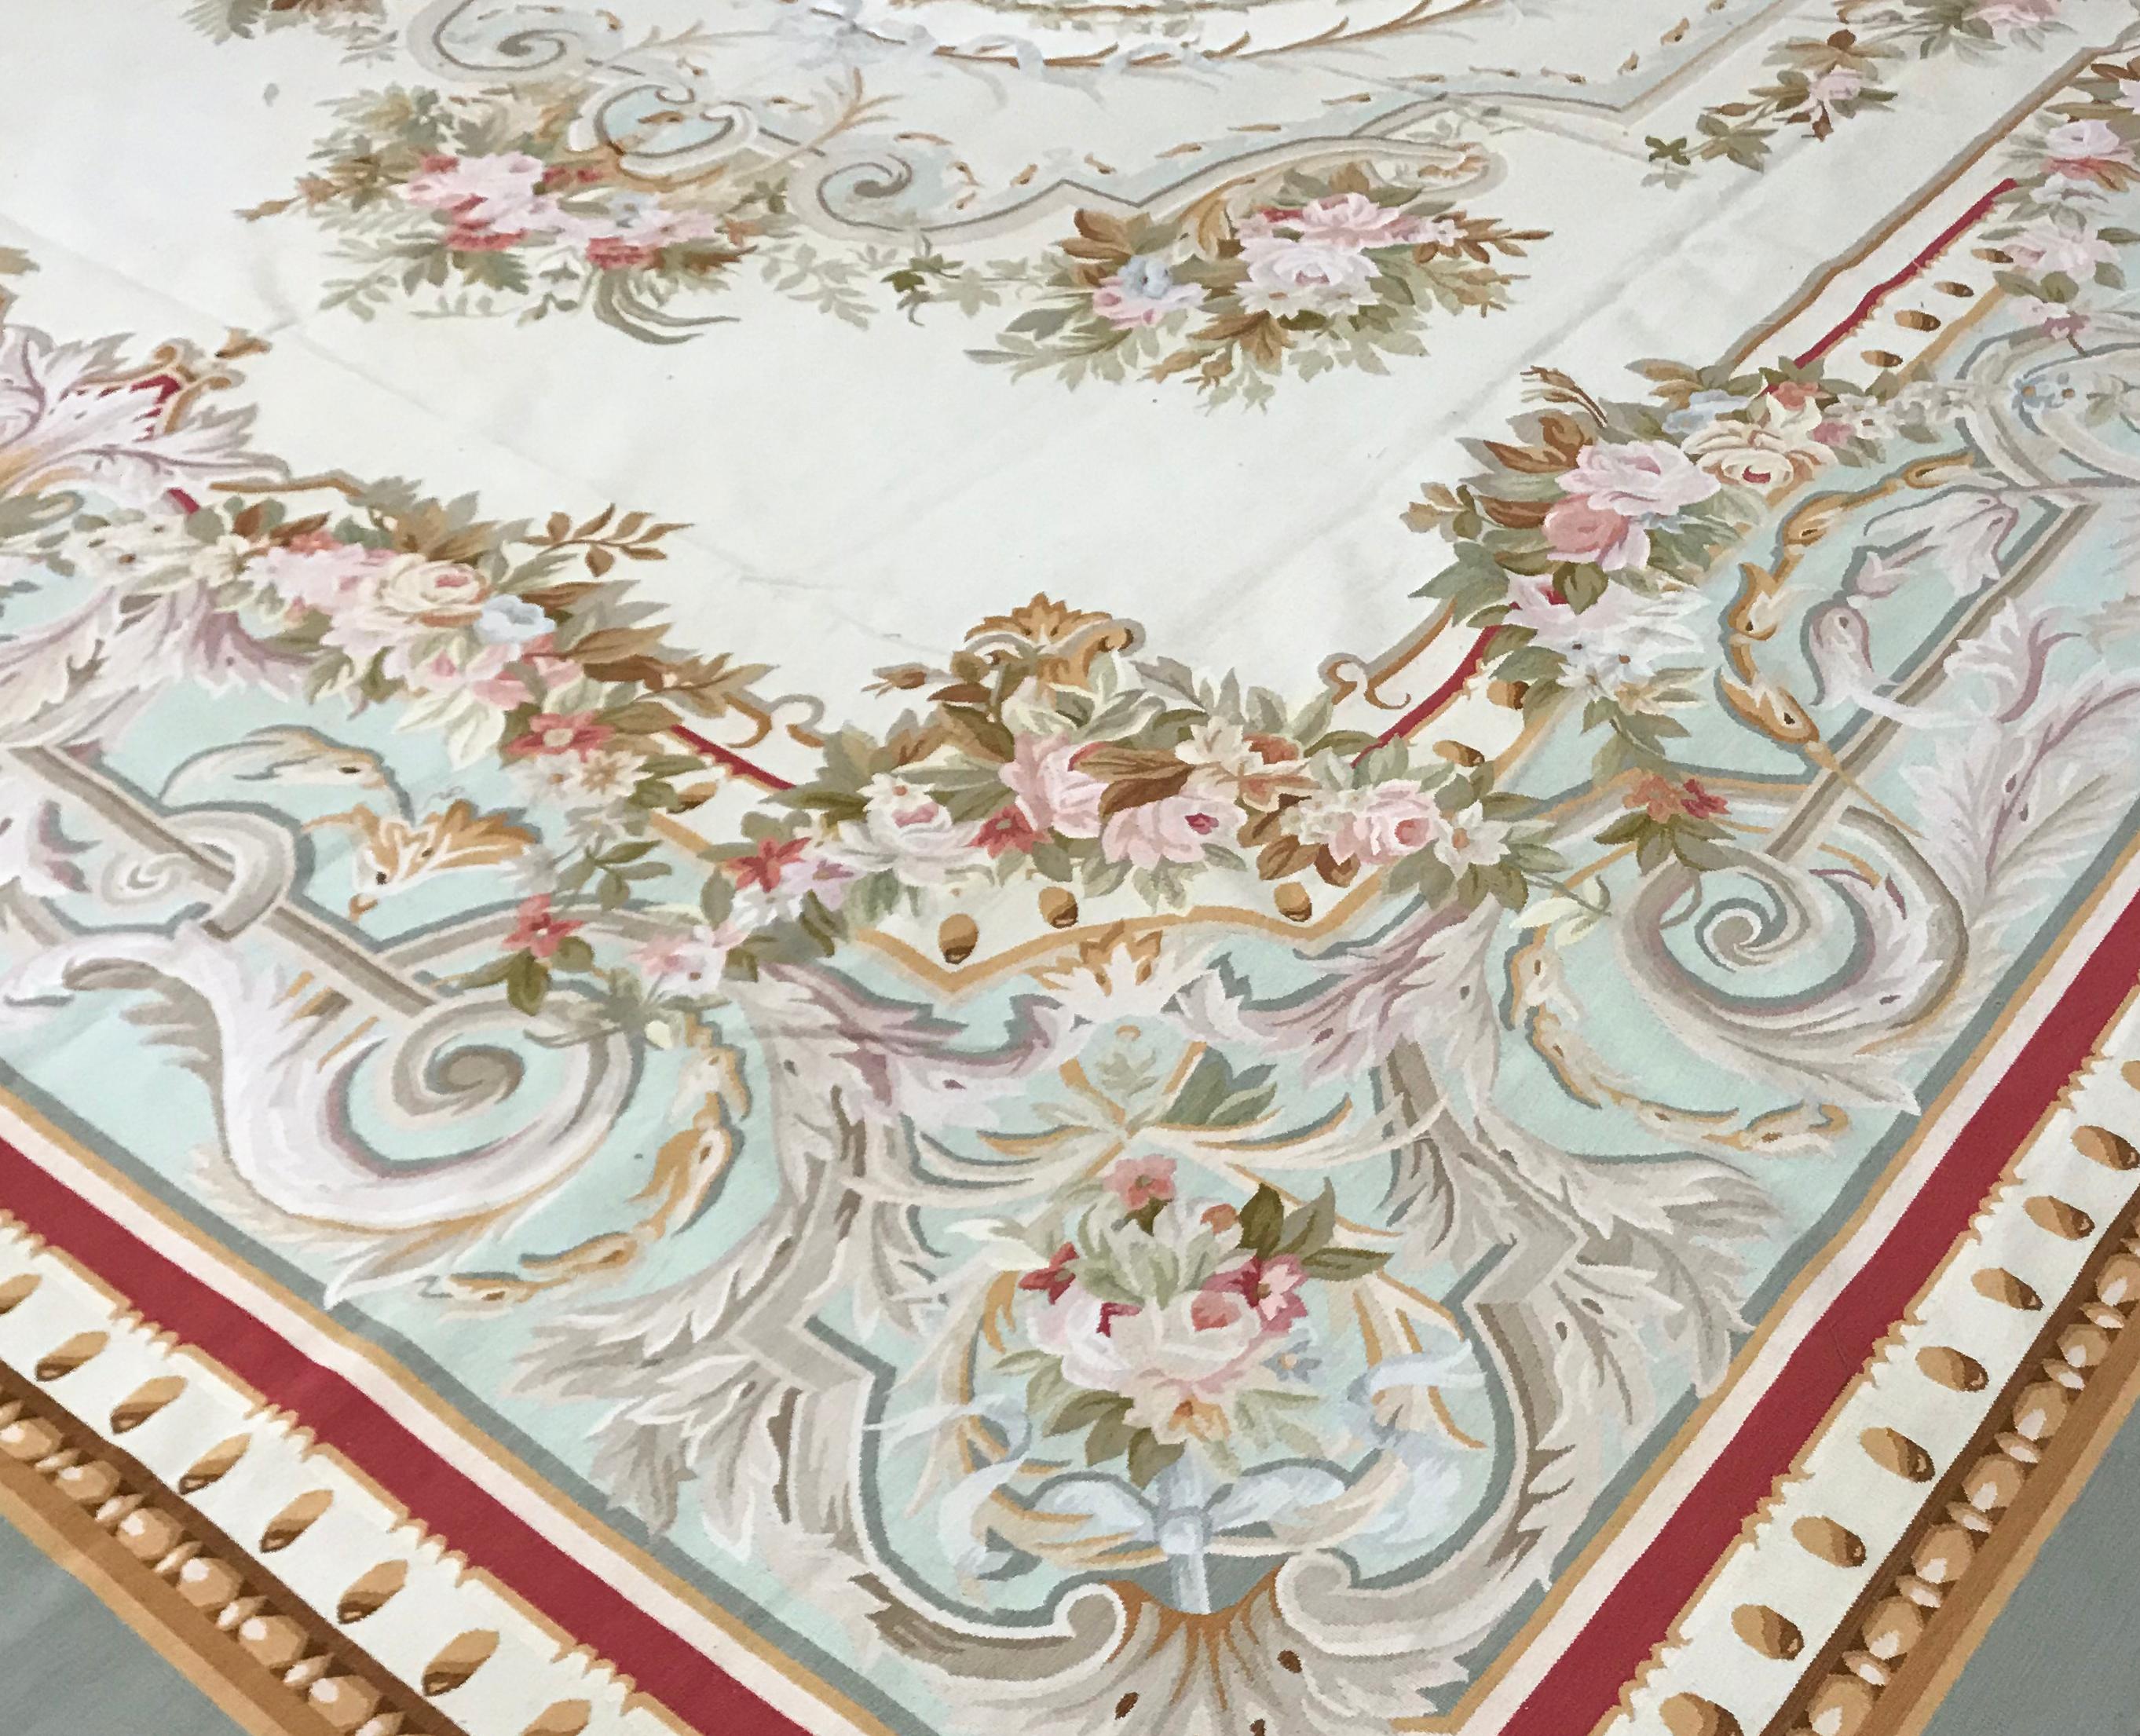 Hand-Woven 17th Century Traditional French Aubusson Style Flat-Weave Rug